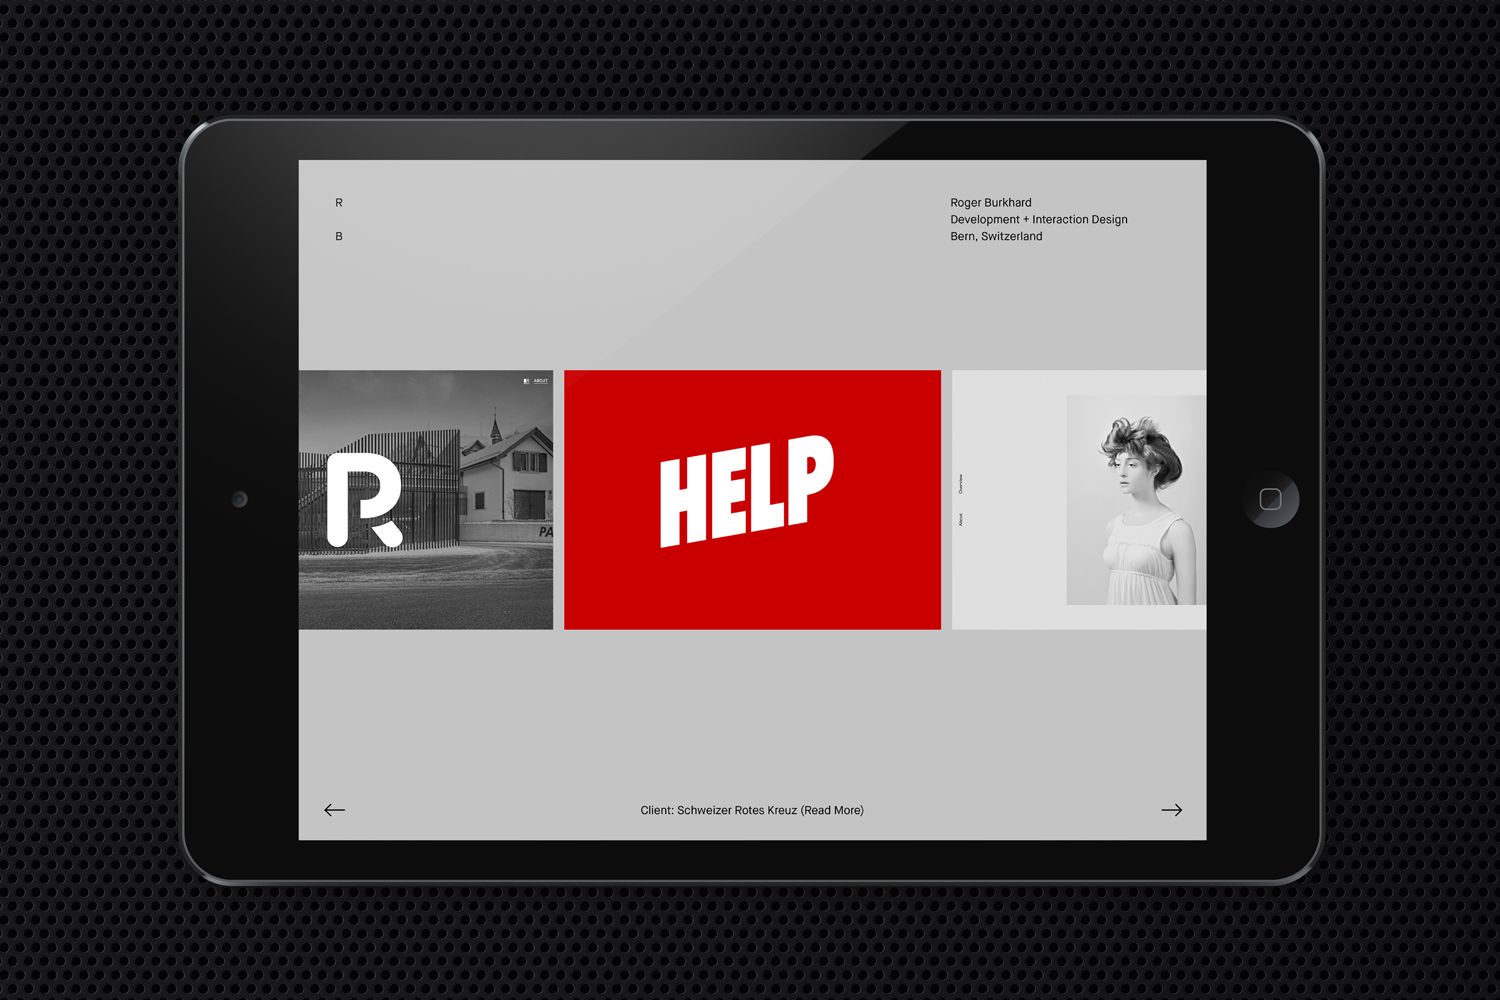 Logo, stationery, business cards and website by Lundgren+Lindqvist for Swiss web development and interactive studio Roger Burkhard